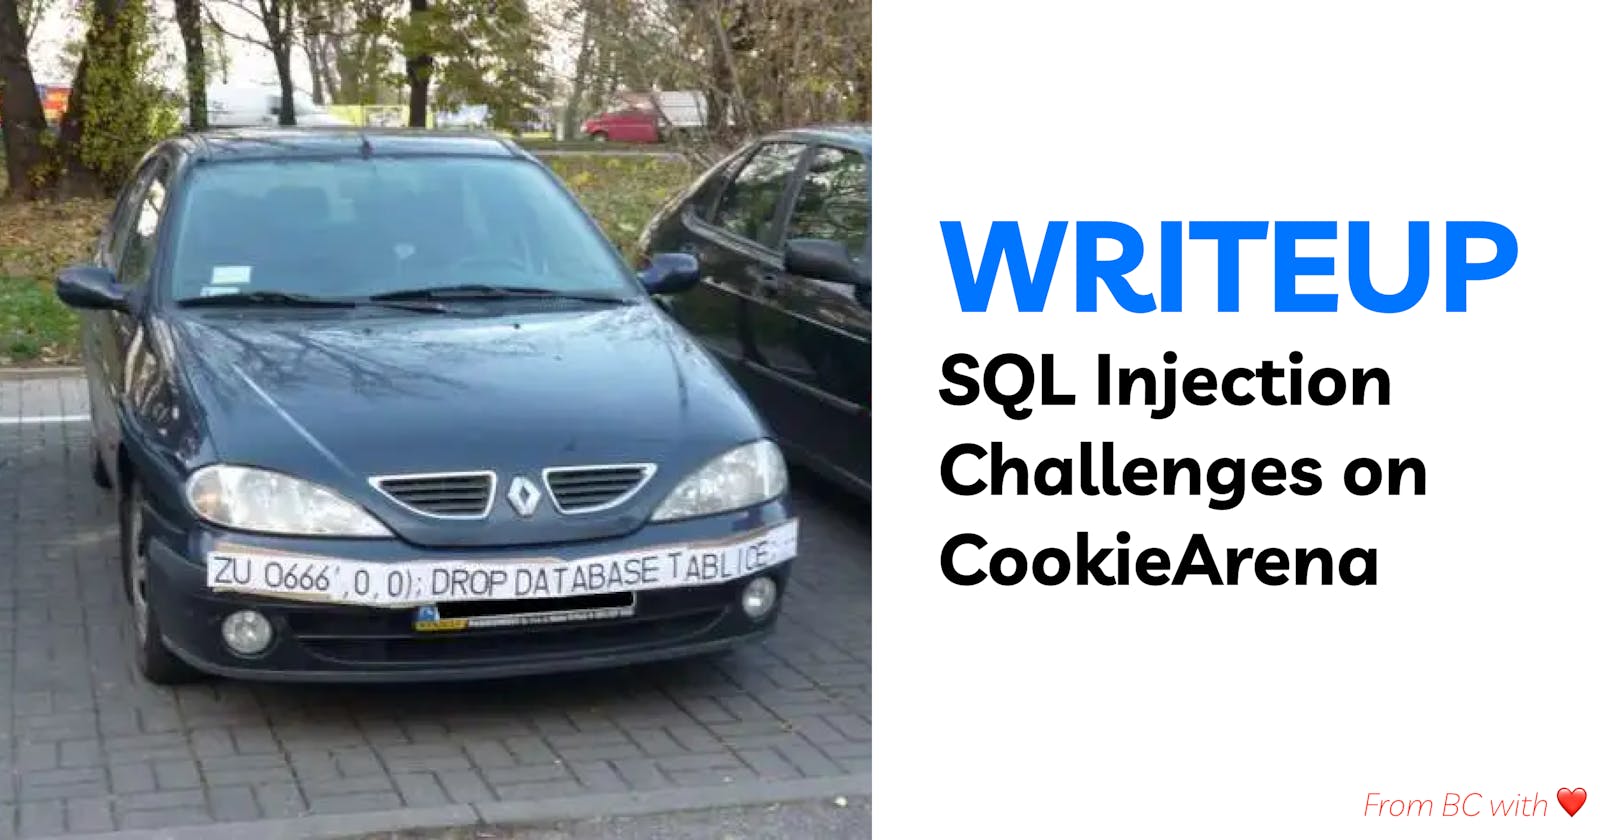 SQL Injection Challenges on CookieArena